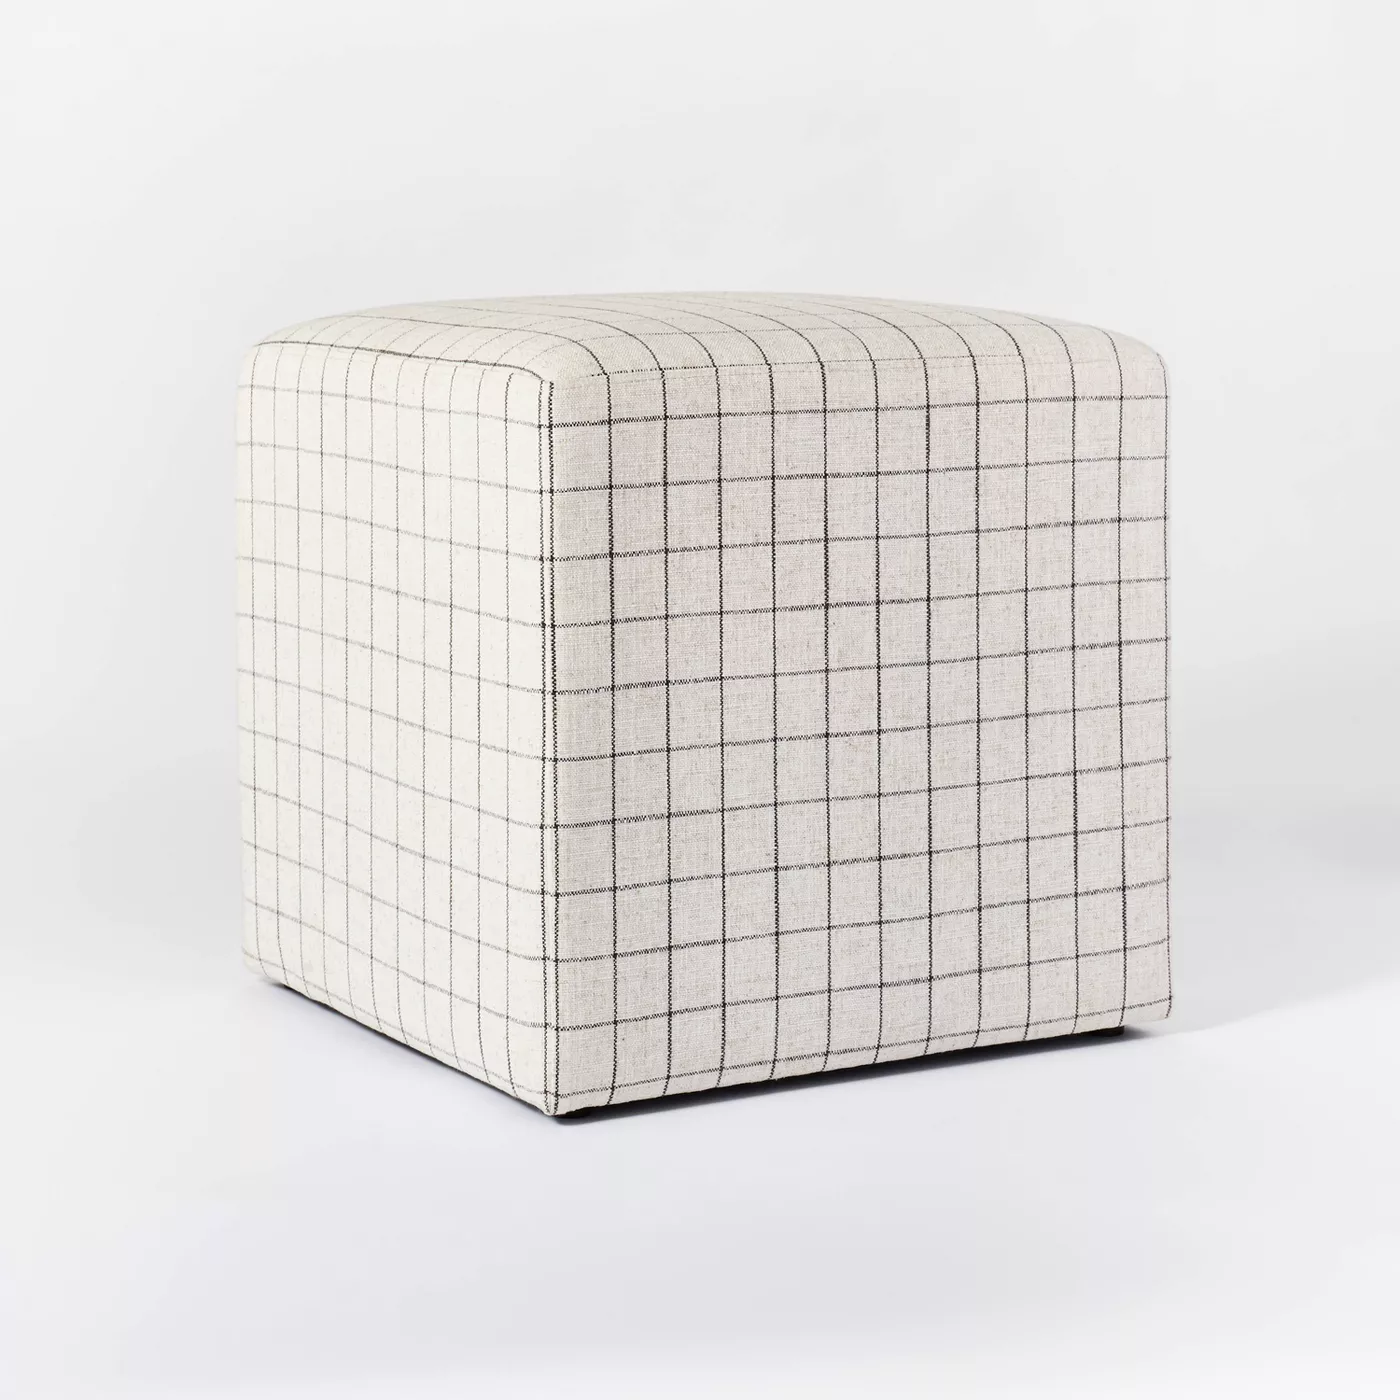 Shop Lynwood Square Upholstered Cube from Target on Openhaus